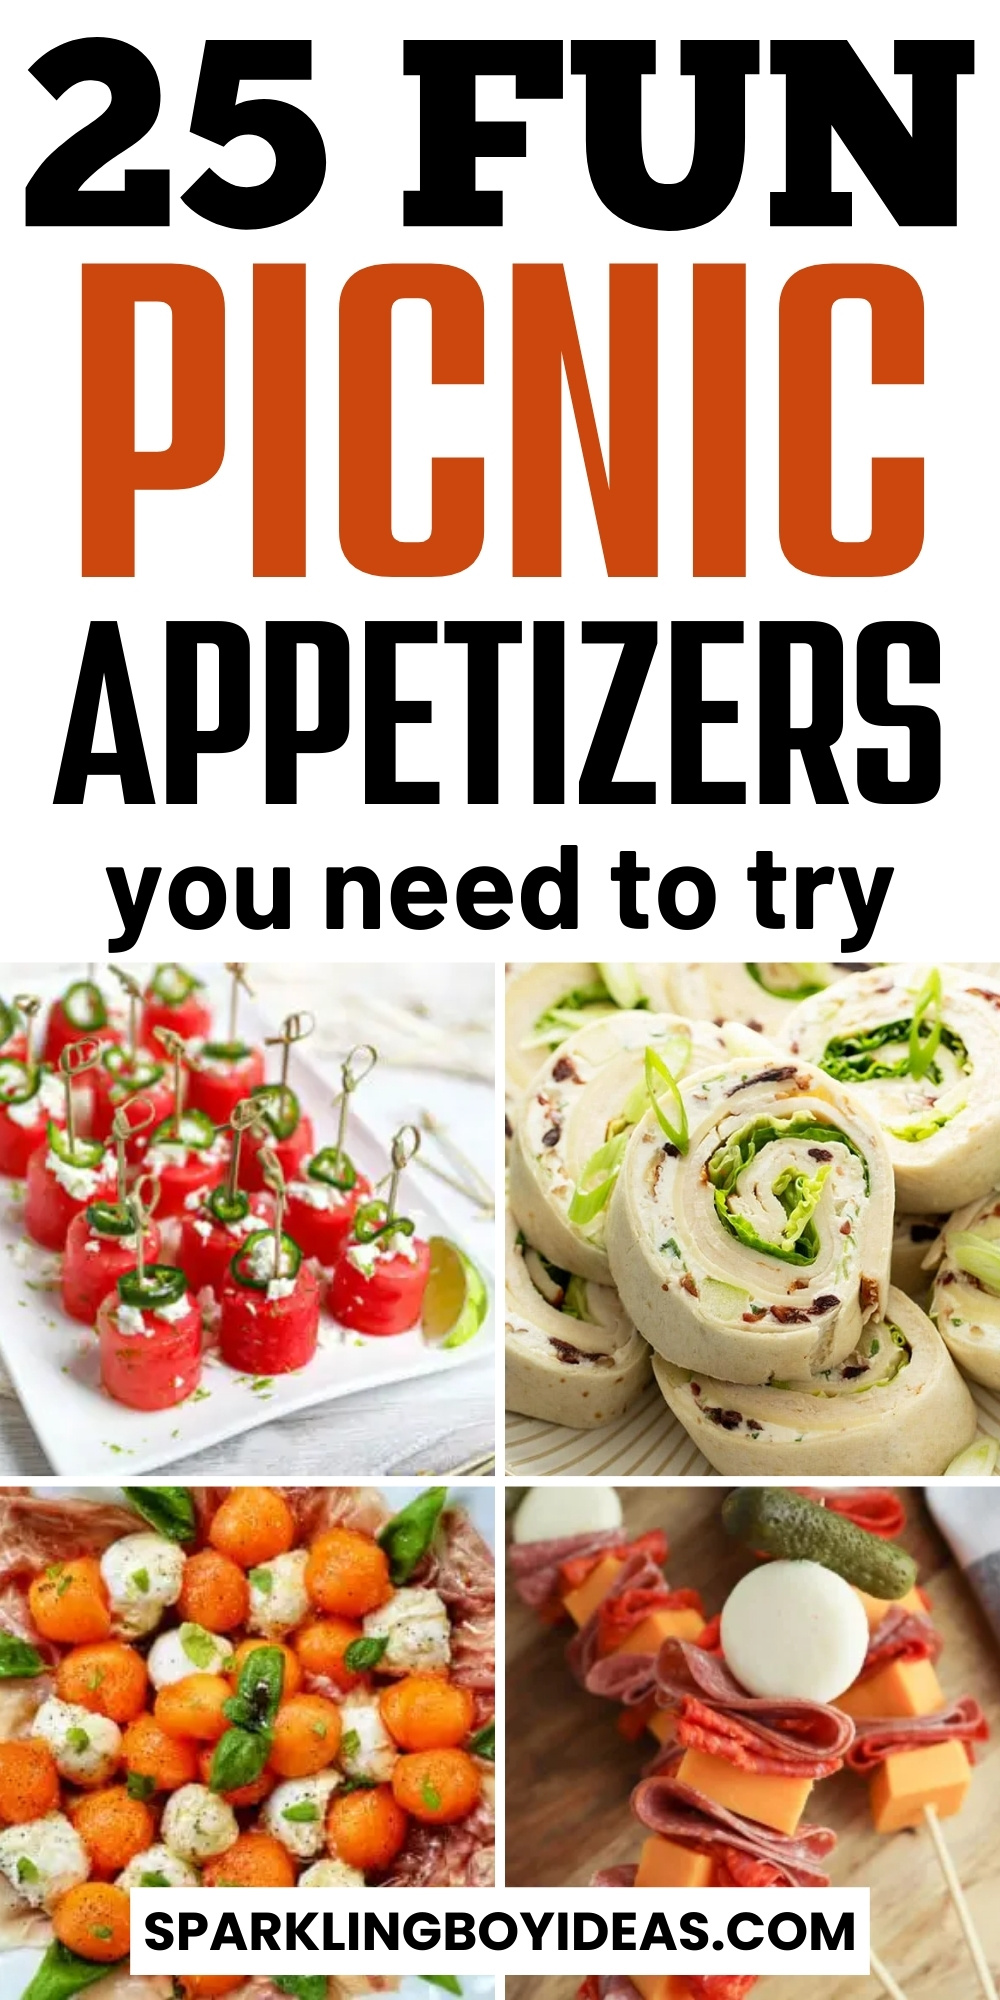 25 Easy Picnic Appetizers - Sparkling Boy Ideas